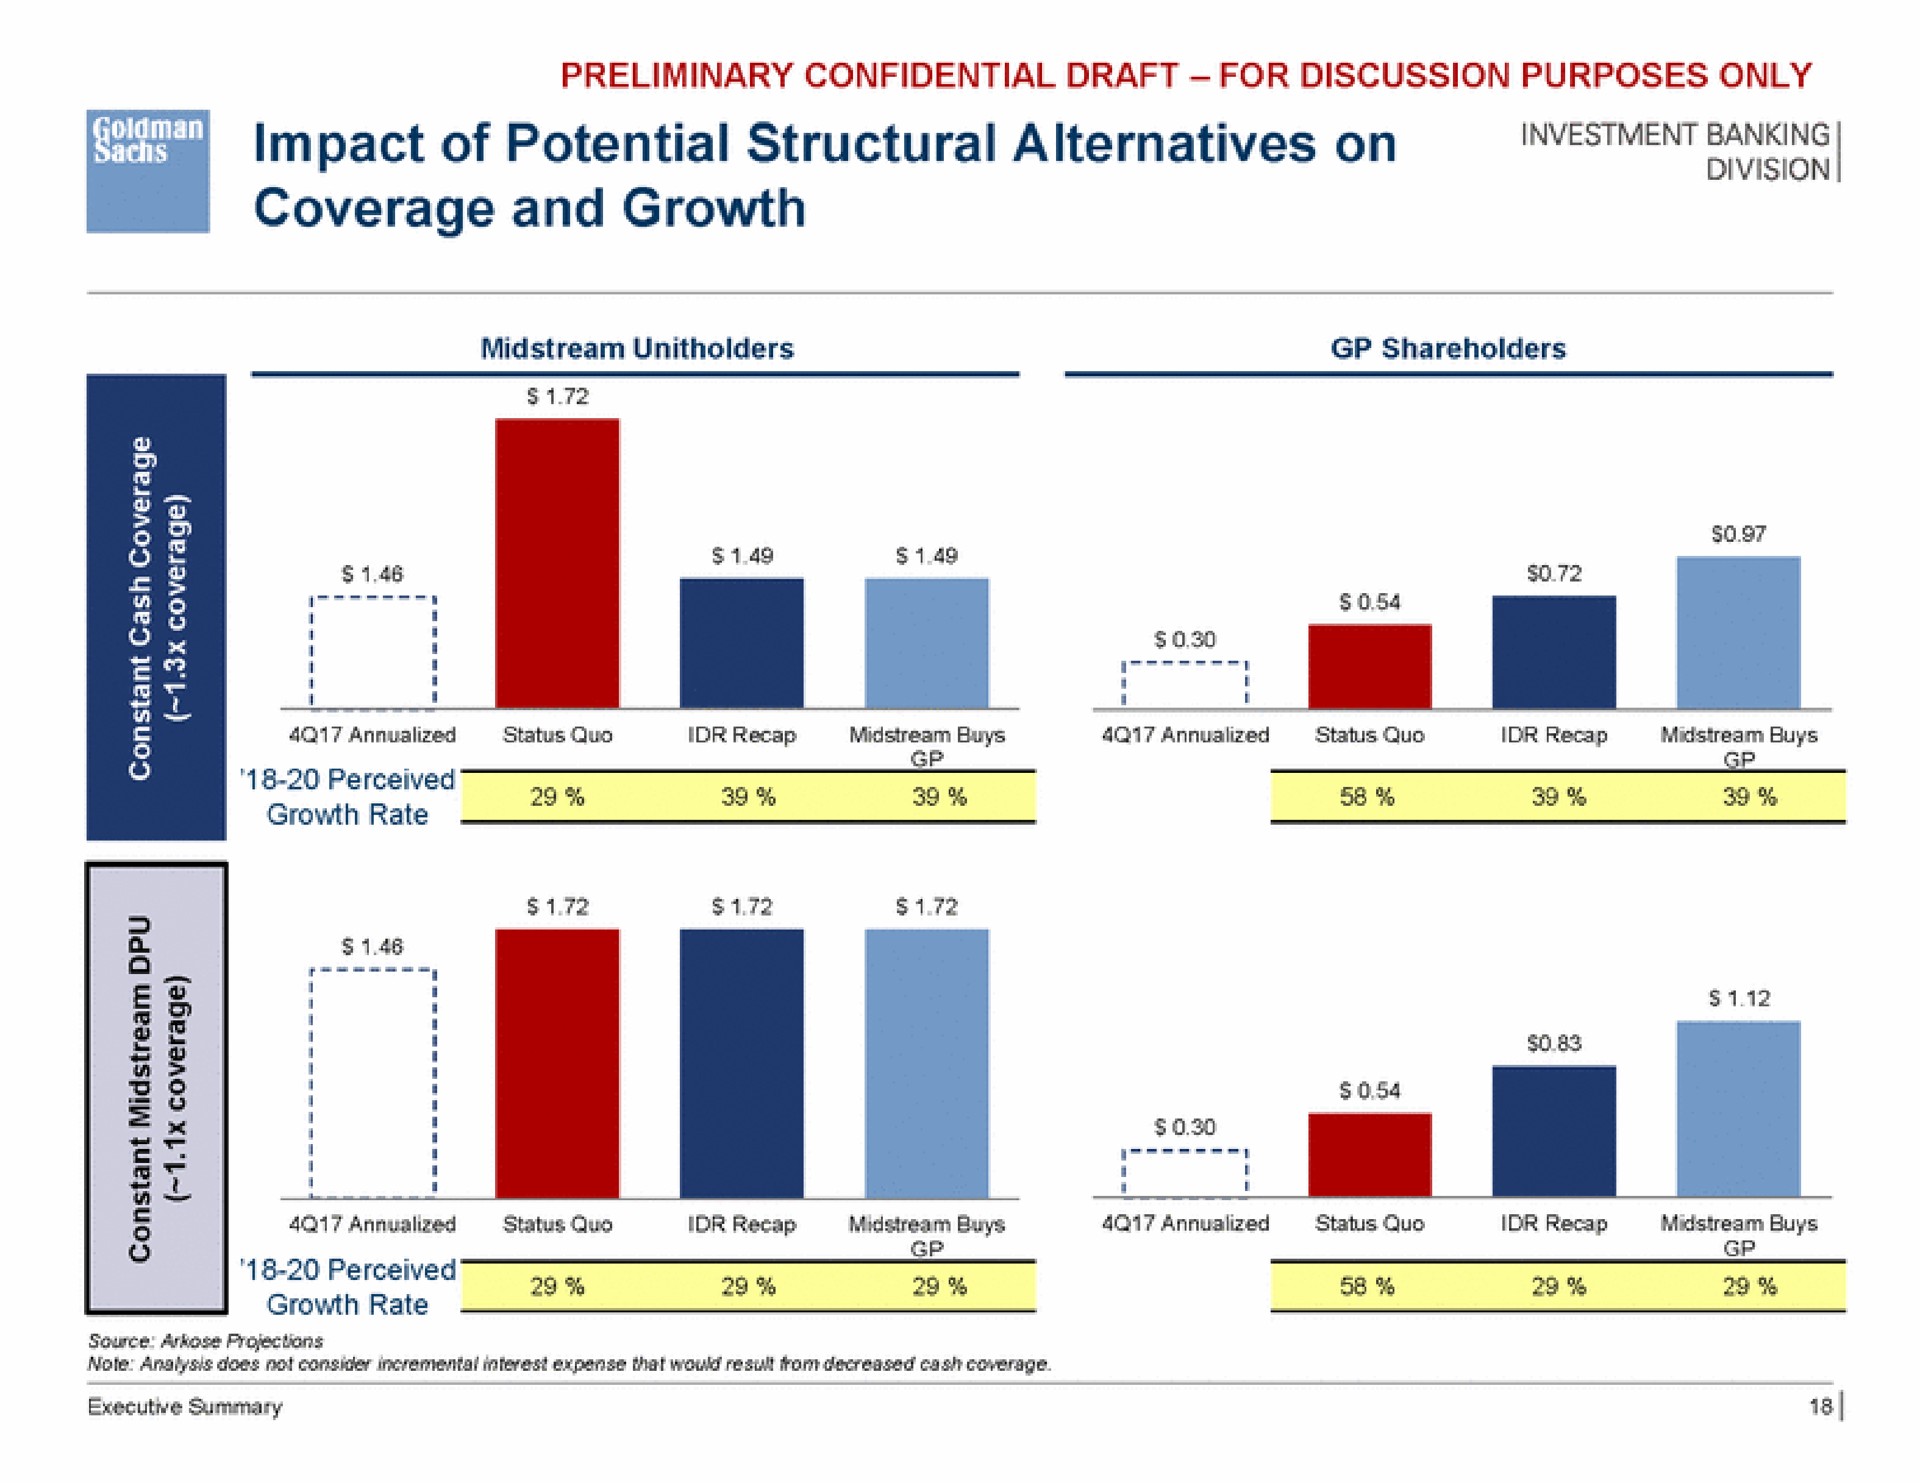 silenced poet impact of potential structural alternatives on coverage and growth a | Goldman Sachs